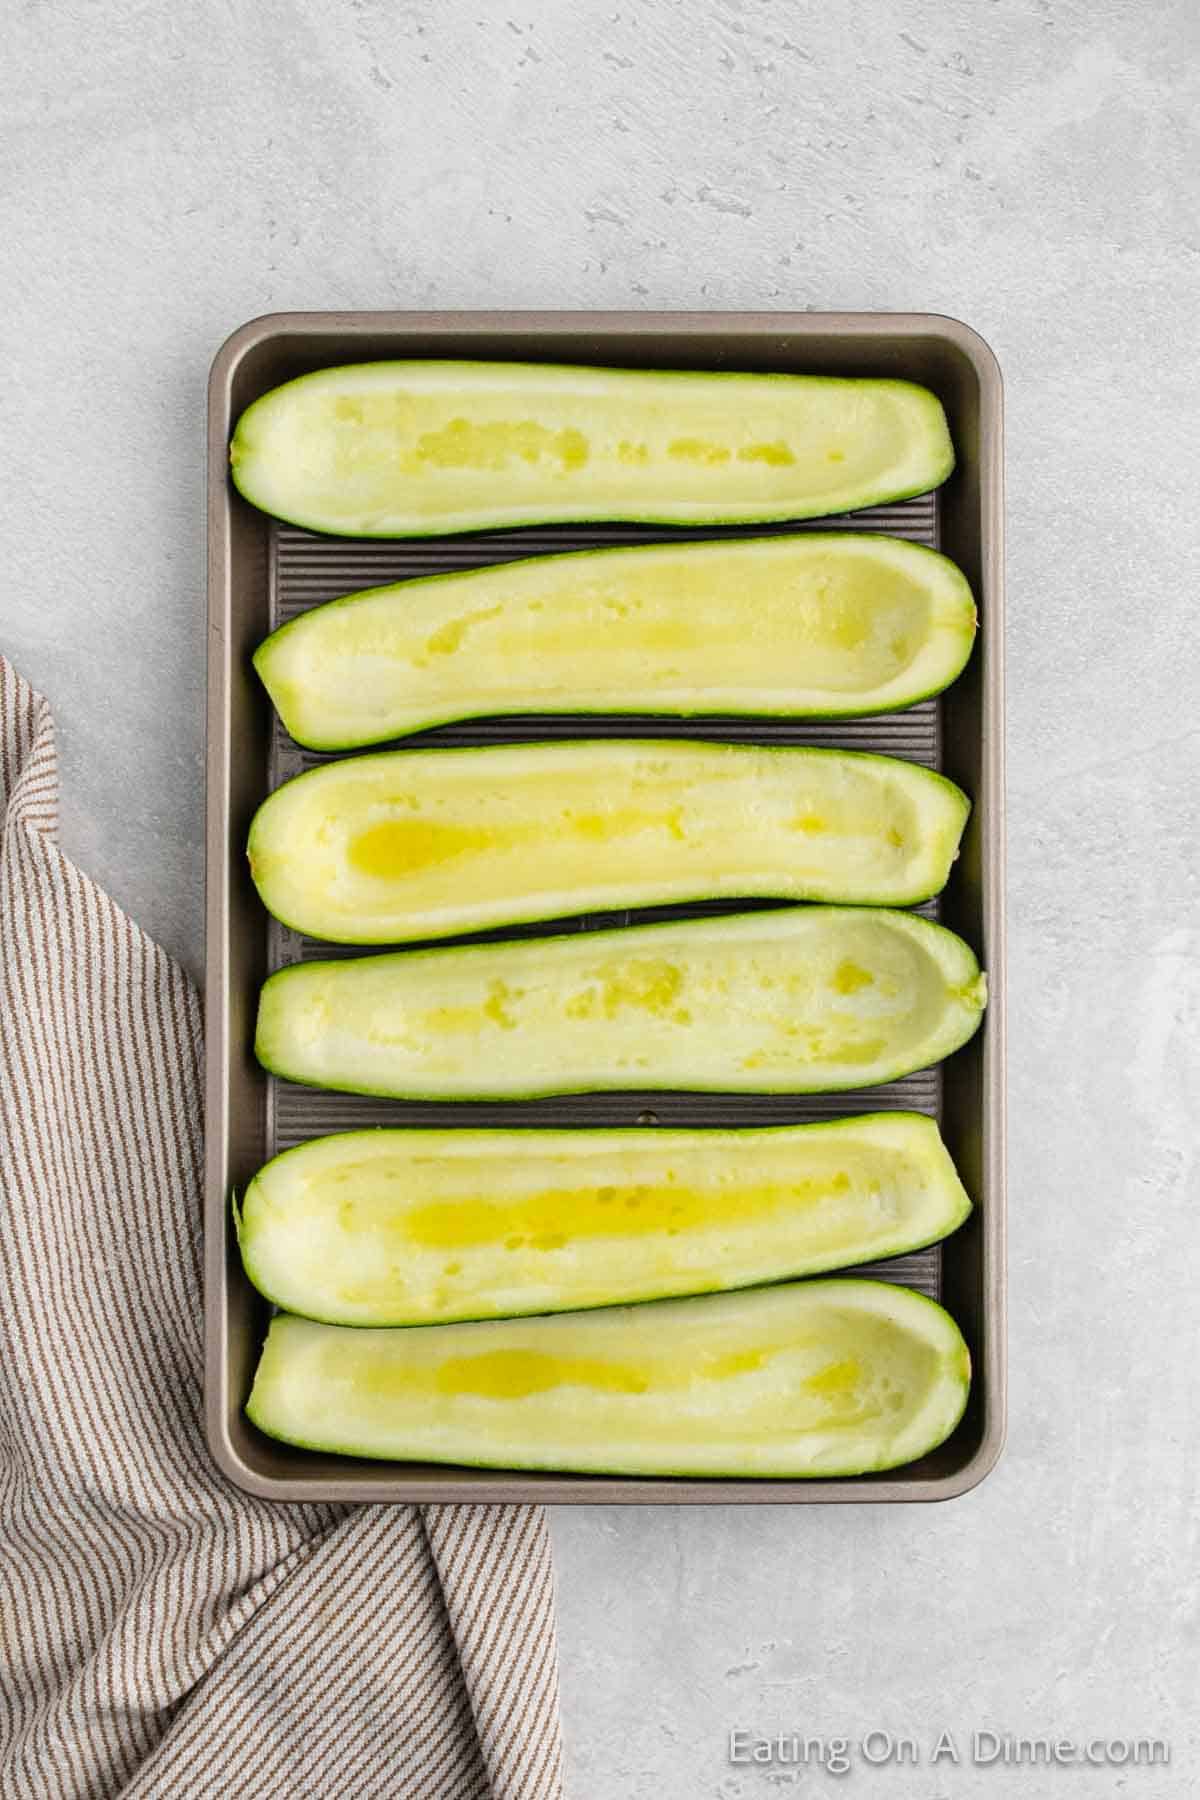 A baking tray with six halved and scooped-out zucchini, brushed with oil or butter, arranged neatly in two rows of three. Perfect for a stuffed zucchini boats recipe, the tray is placed on a light gray surface next to a striped kitchen towel.